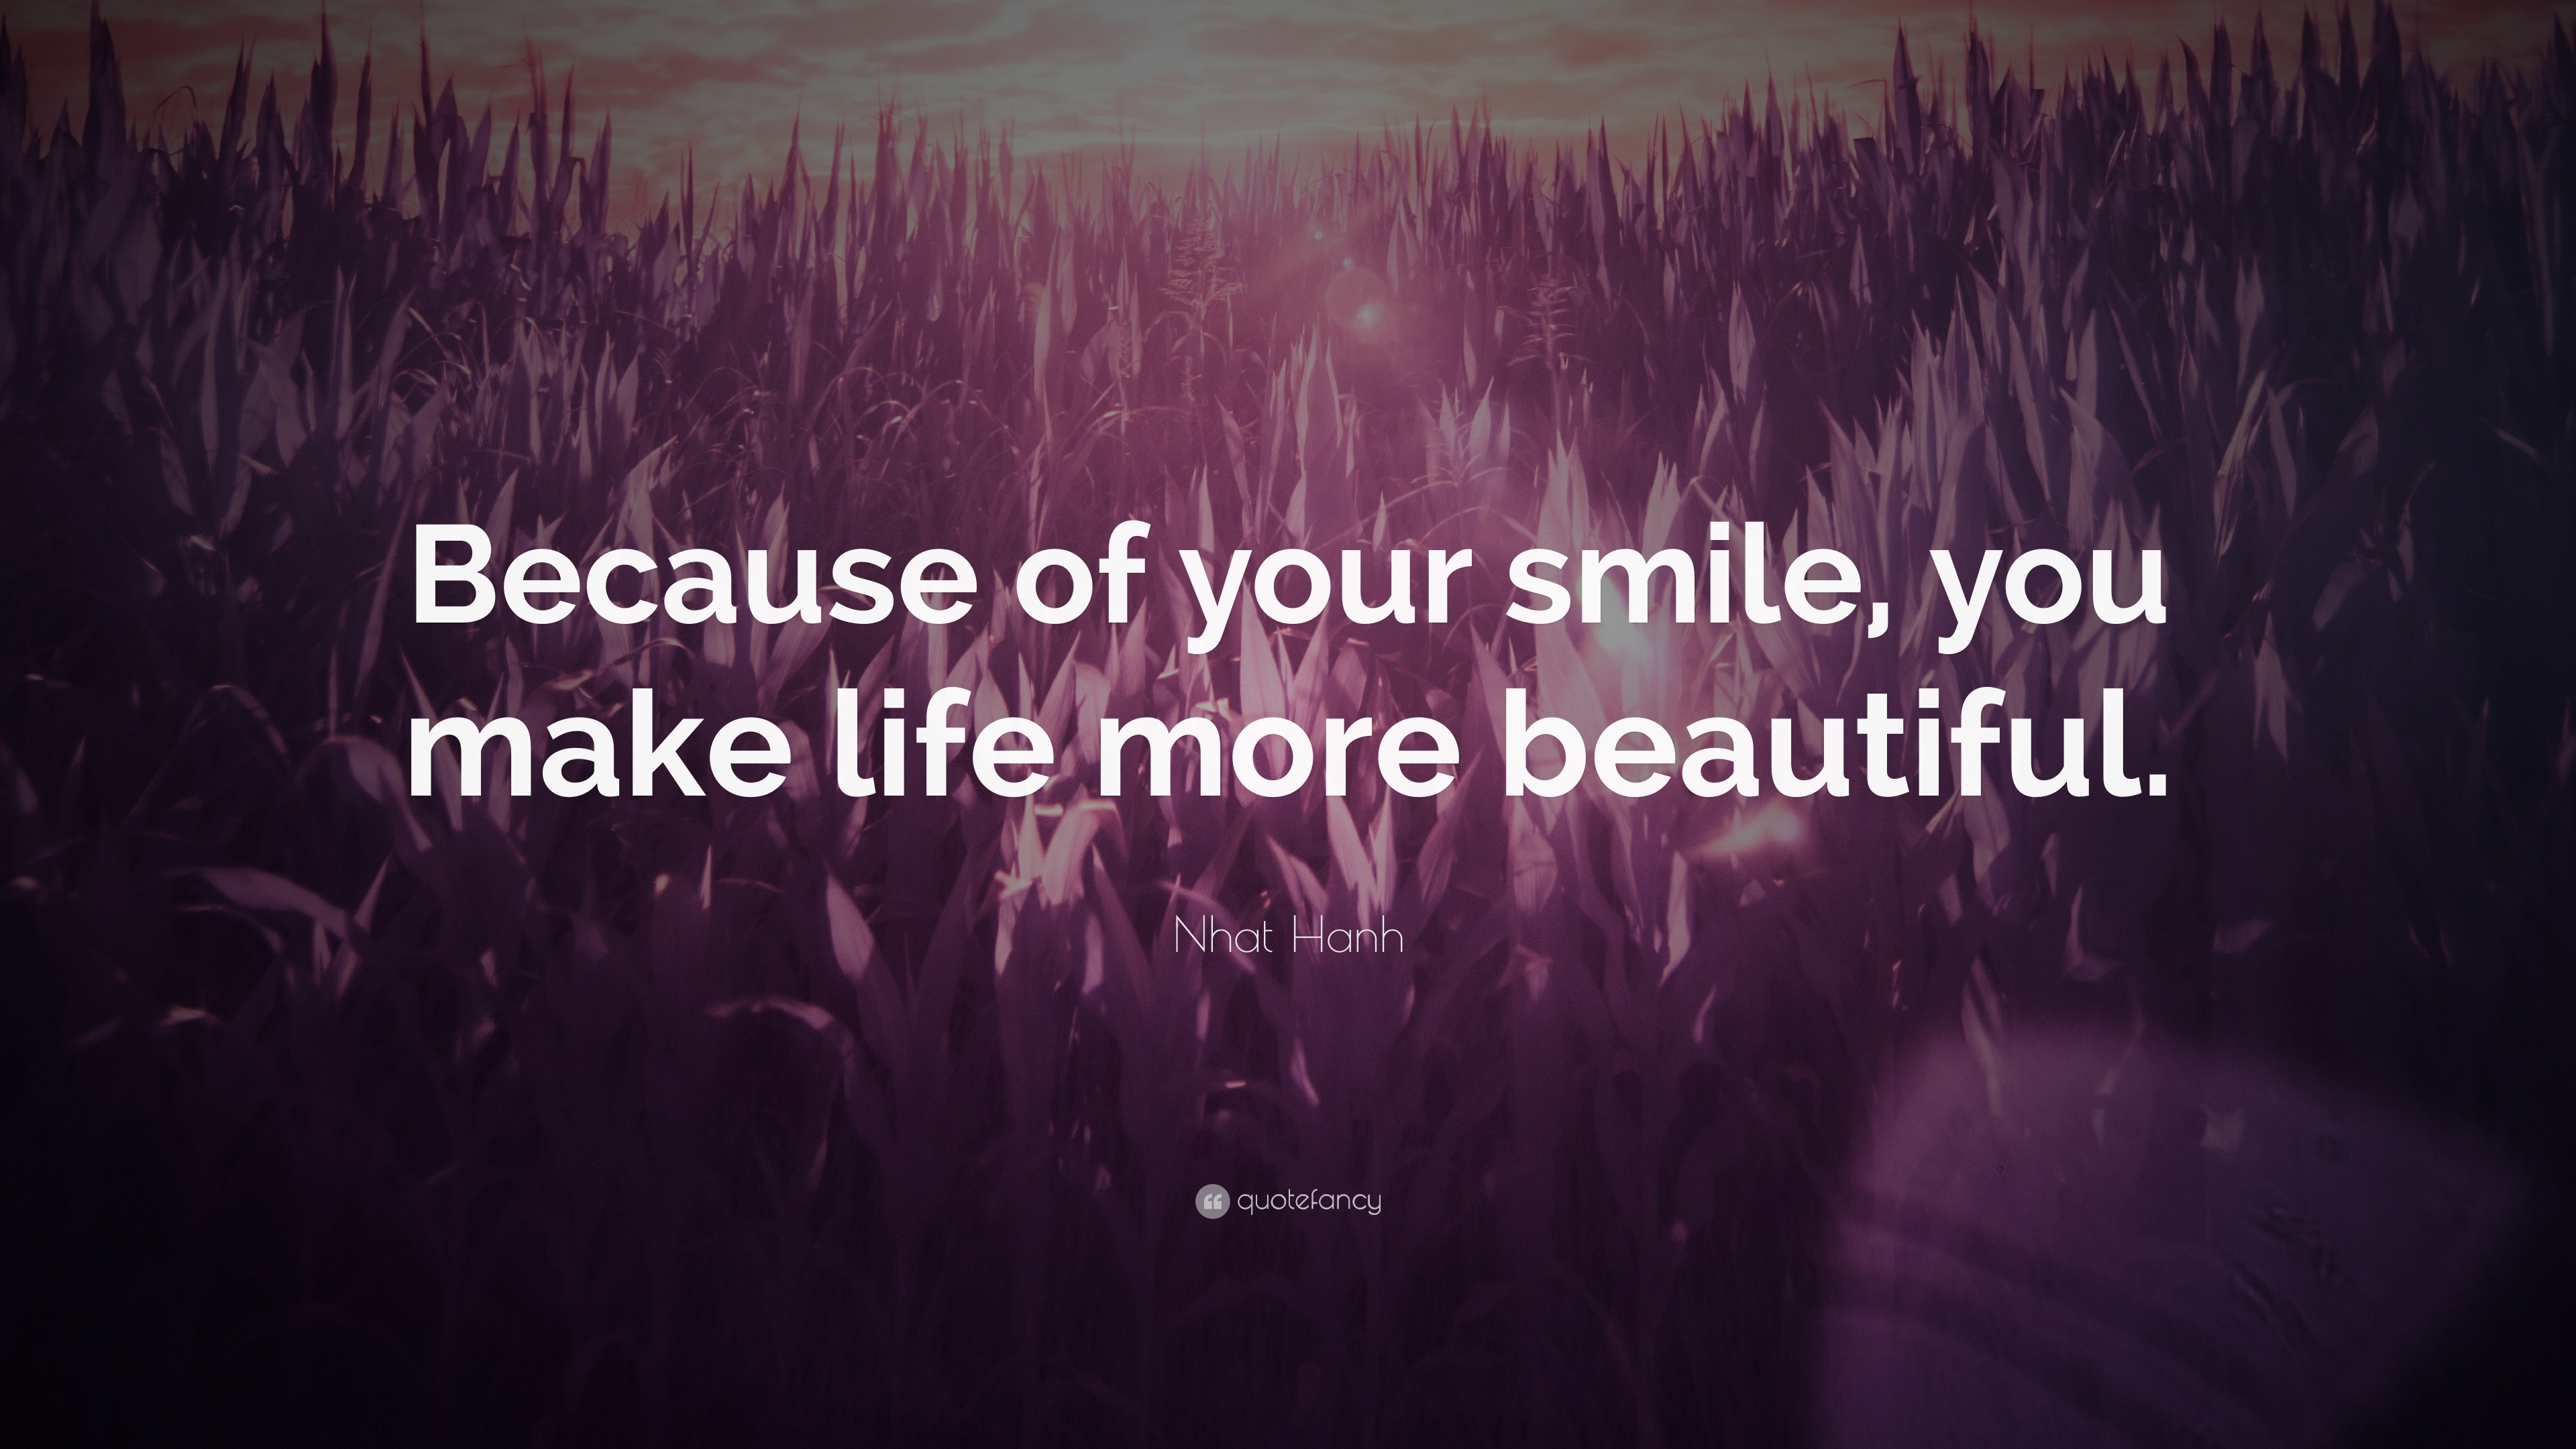 You are beautiful when you smile